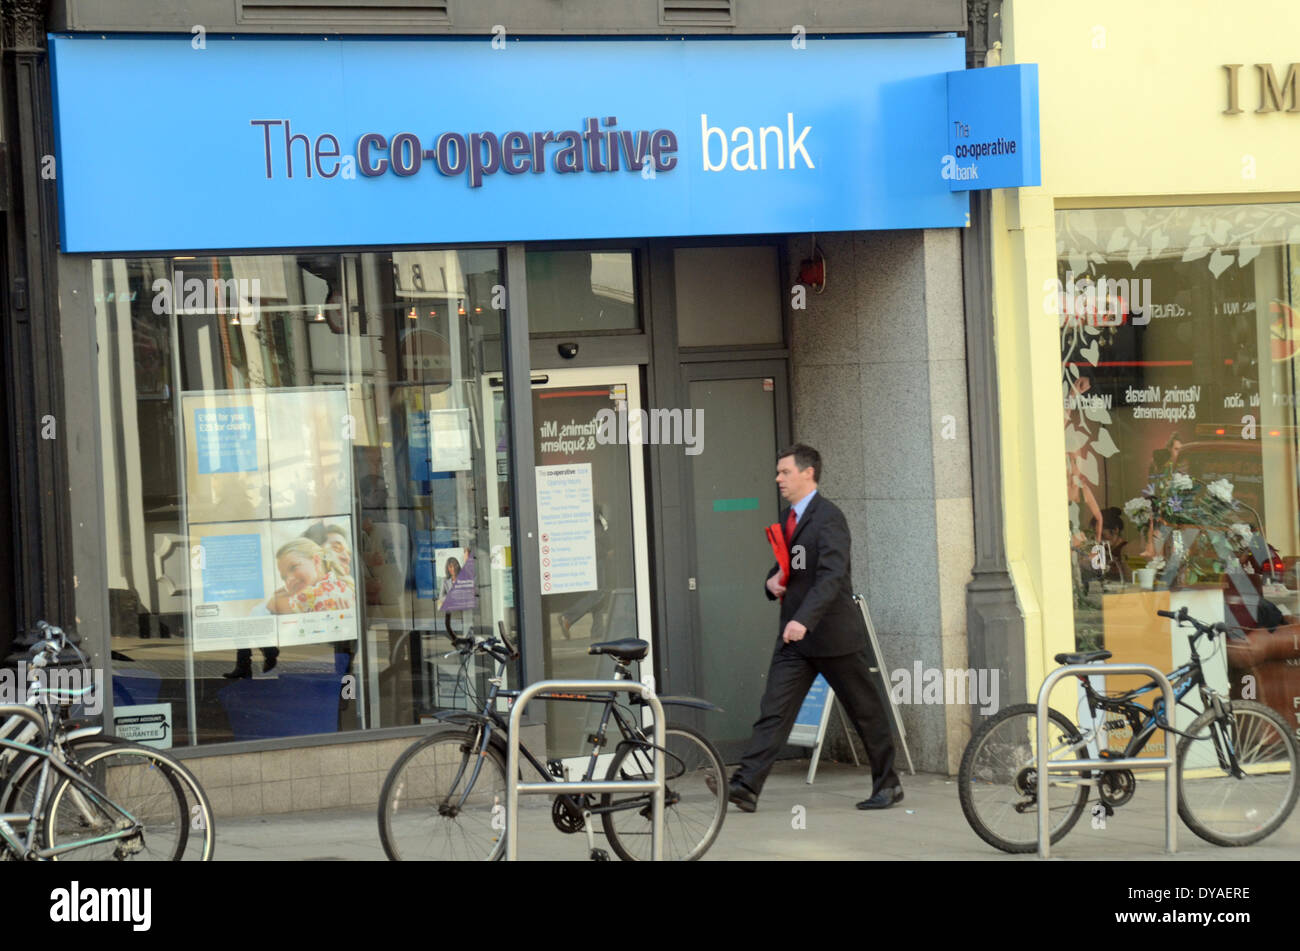 London, 11 April 2014, Co-op bank apologises for £ 1.3 billion loss for 2014 to it's 4.7 million customers after discovery of £1.5 billion pound black hole. Stock Photo